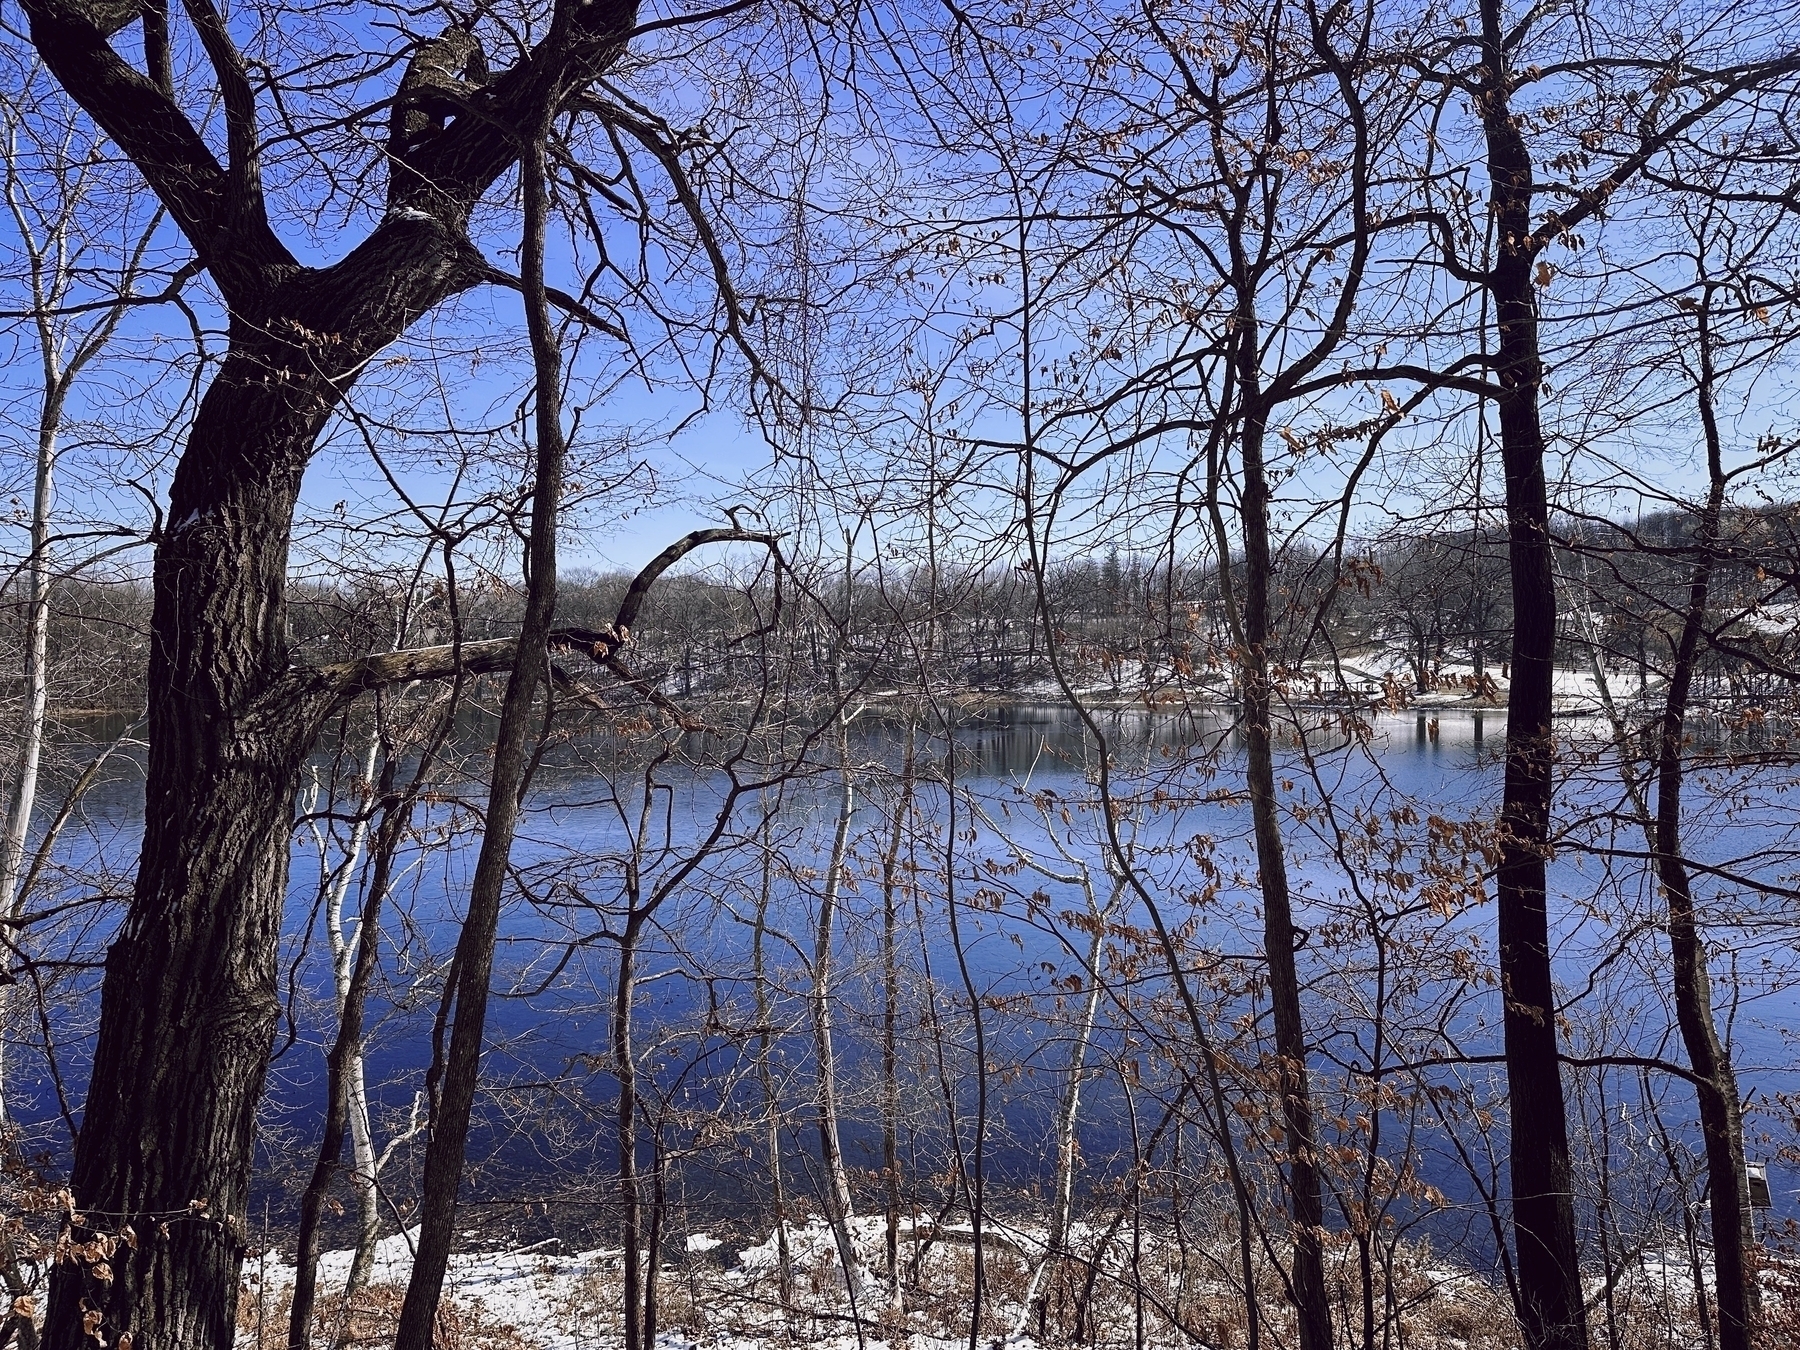 Bare trees frame a view of a calm lake with scattered snow on the ground under a clear blue sky.